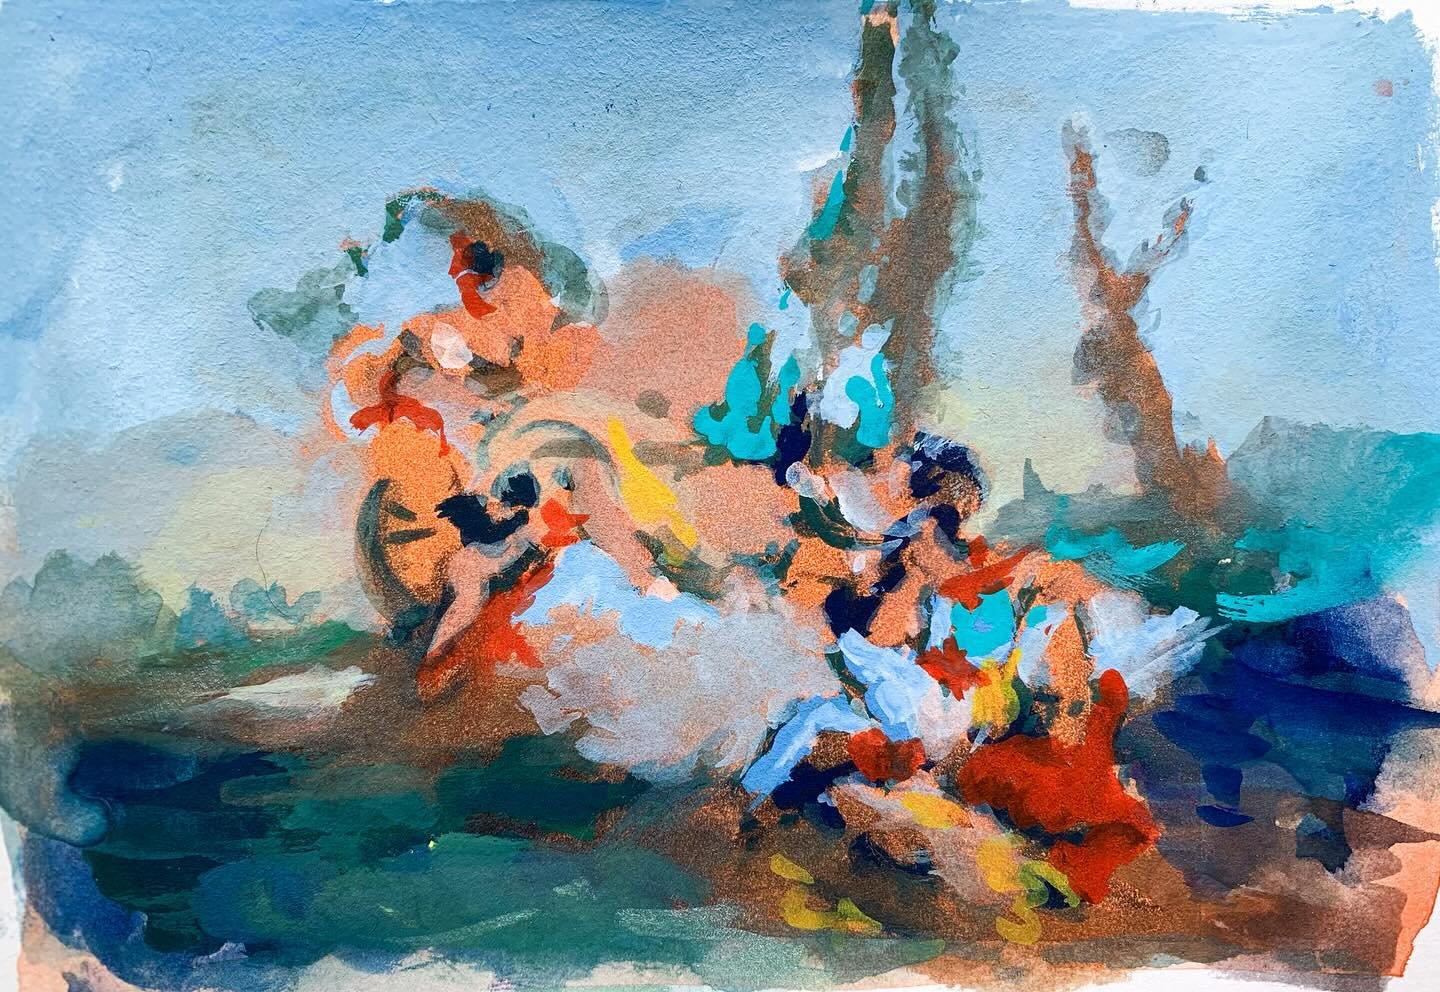 After Tiepolo &mdash;

-
Looking back at some transcriptions of Tiepolo, in particular the values and hues to create structure and movement.
⠀⠀⠀⠀⠀⠀⠀⠀⠀
Gouache on Paper
7 x 15 cm
.
. 
.
.
#Tiepolo #Woods #clouds #Contrejour #oilpainting #enpleinair #c